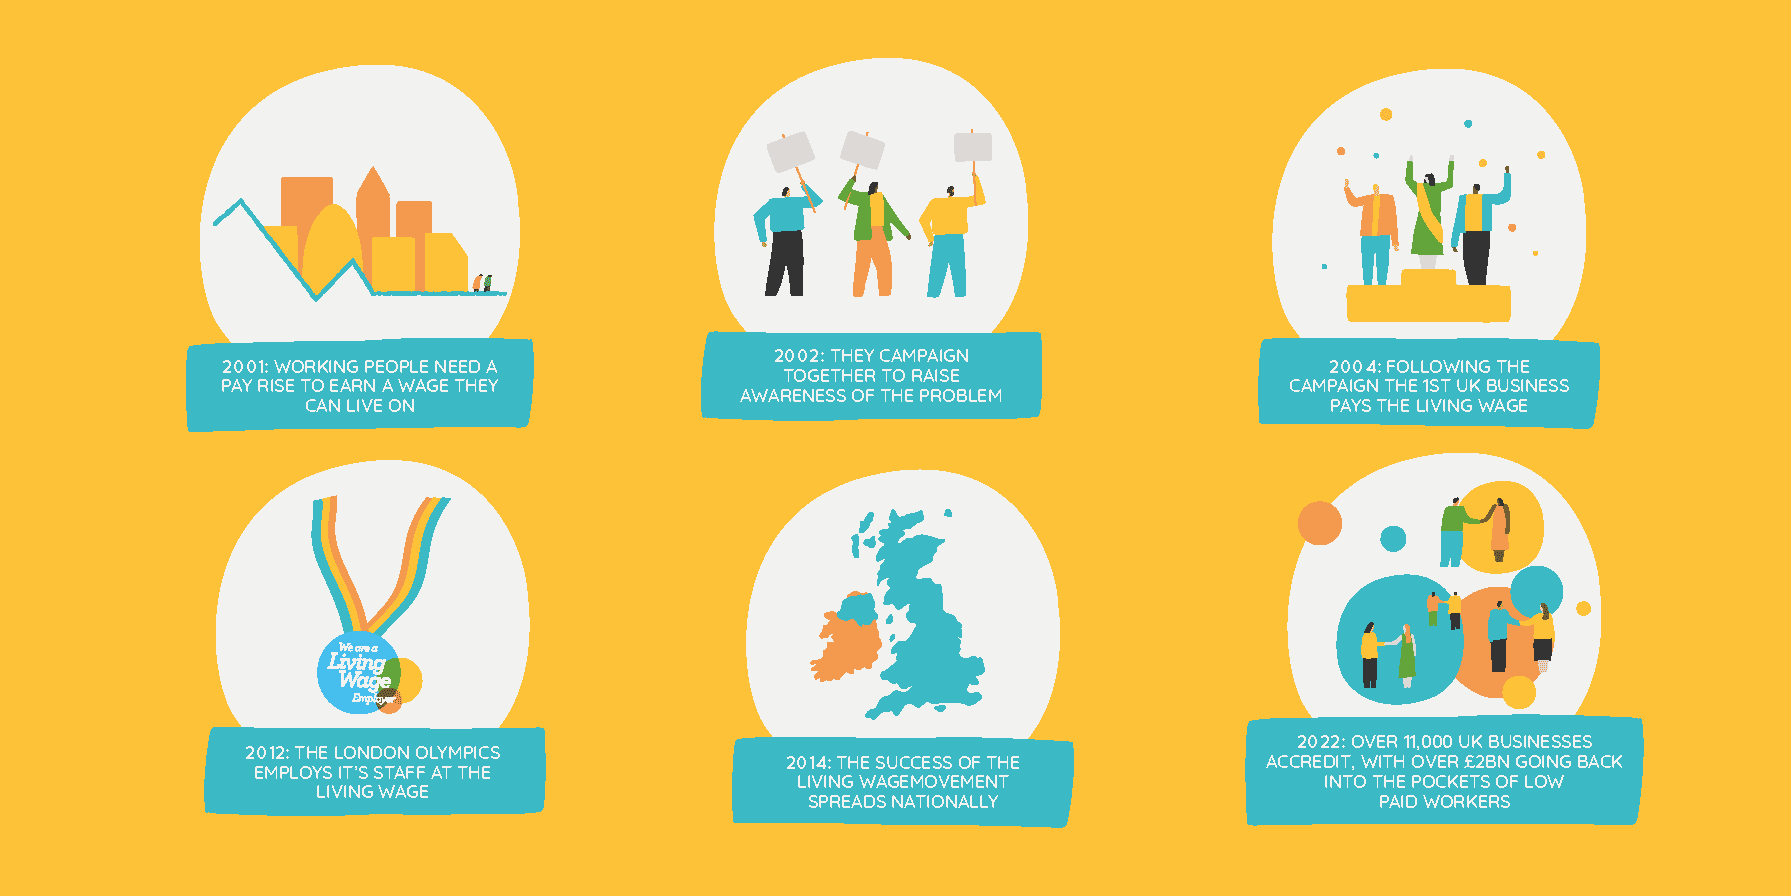 Why the Living Wage campaign matters